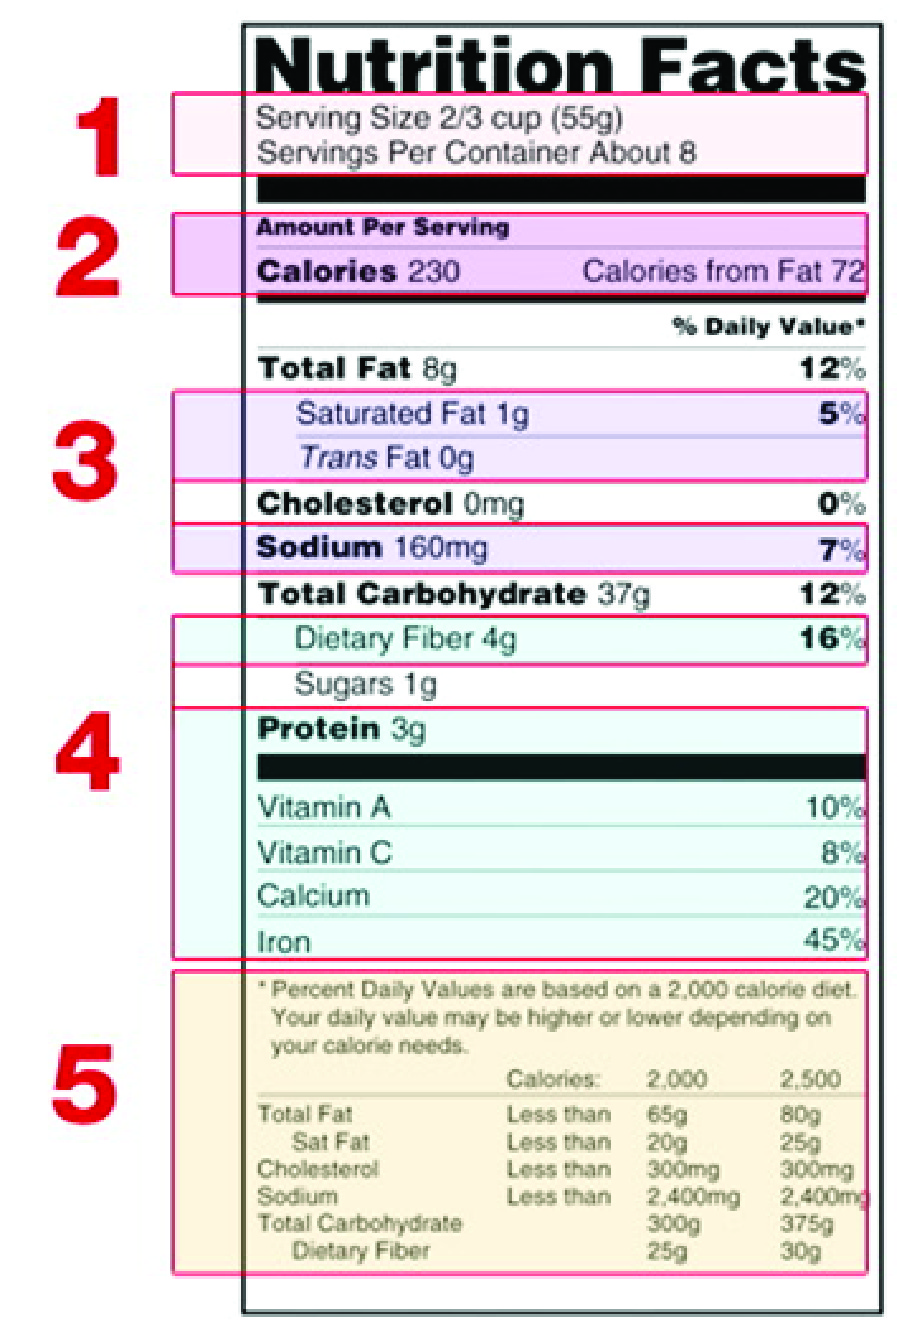 HOW TO UNDERSTANDING FOOD NUTRITION LABELS